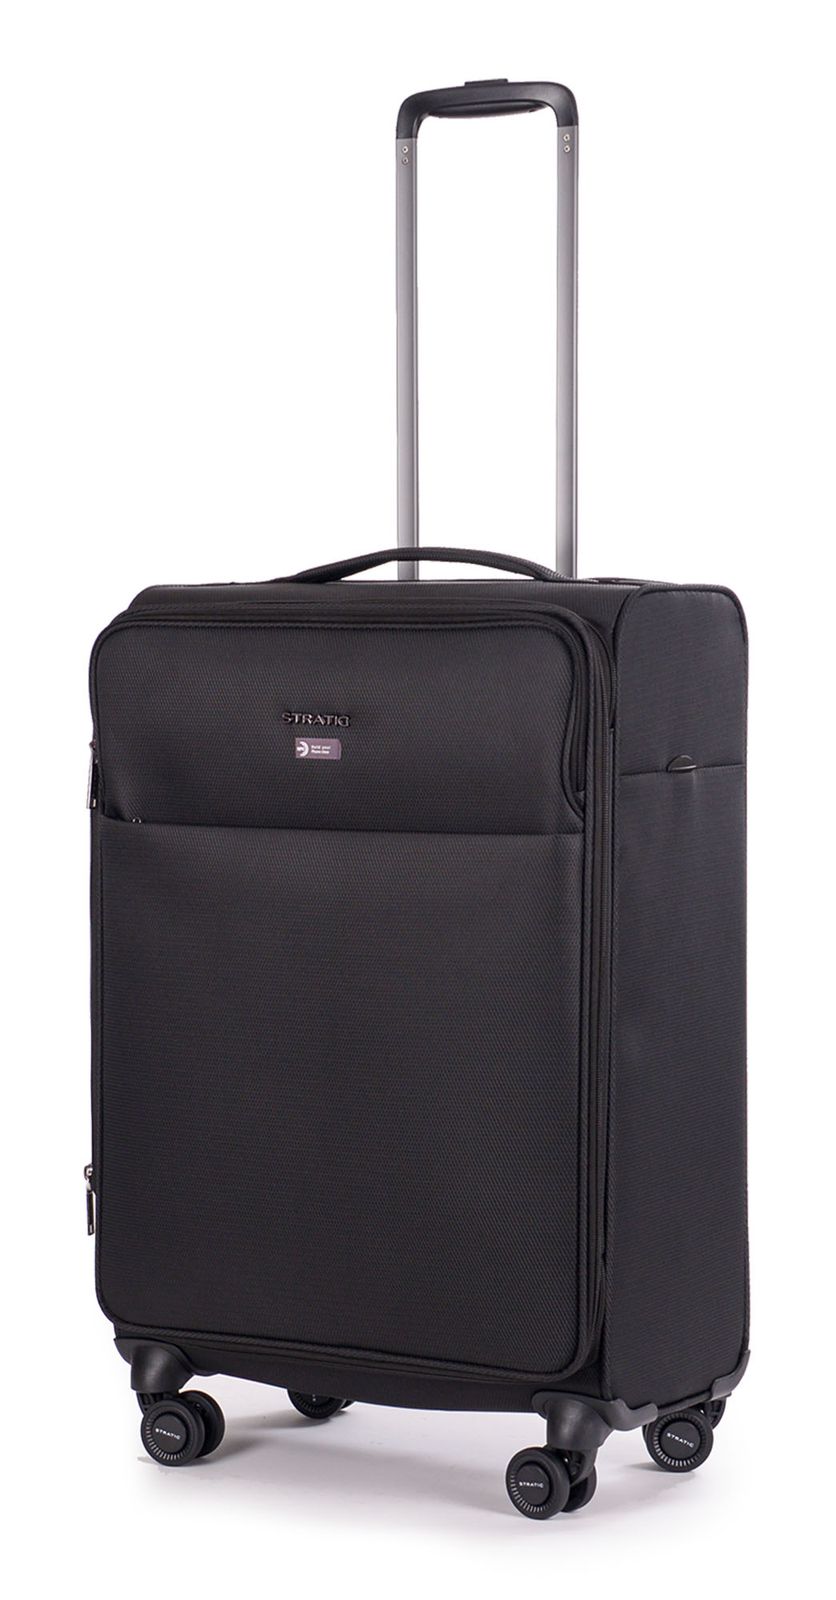 Stratic Trolley Light+ Trolley M, Buy bags, purses & accessories online